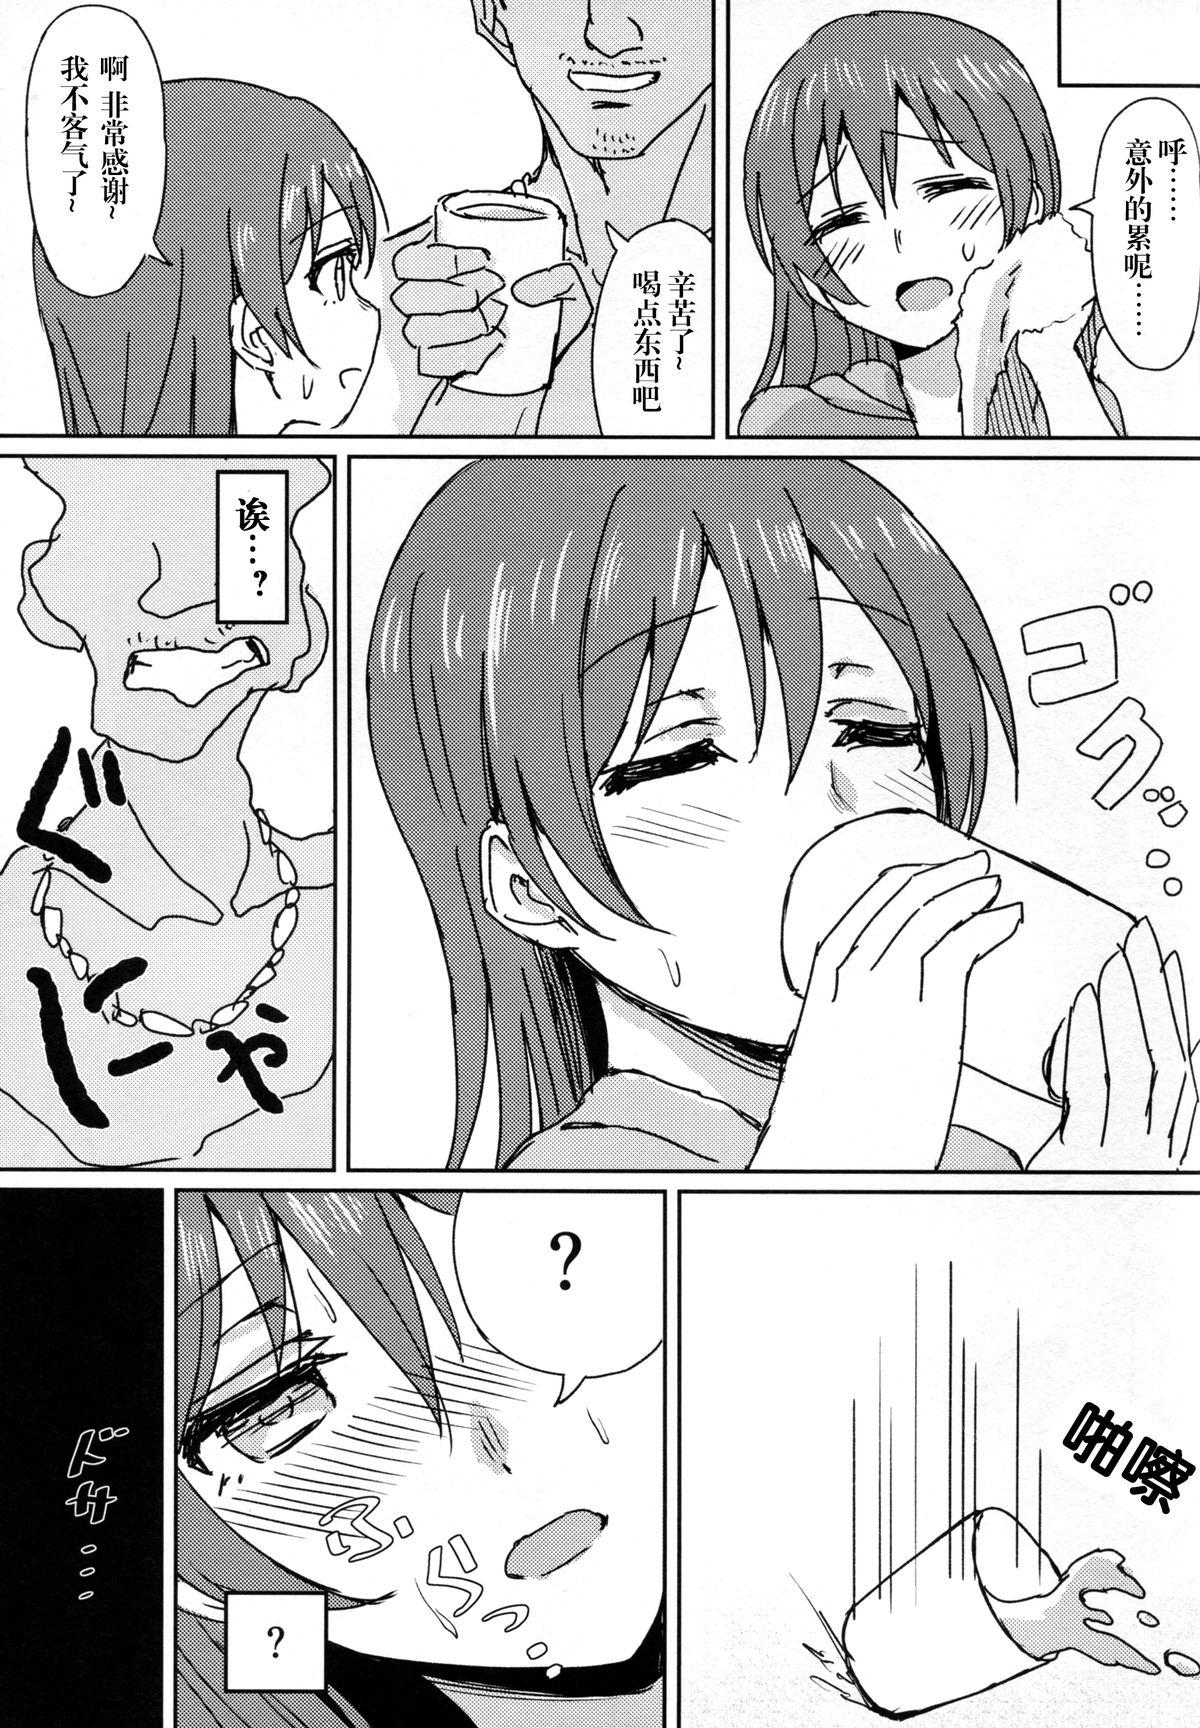 Jav Hah,Wrench This! - Love live Cash - Page 10